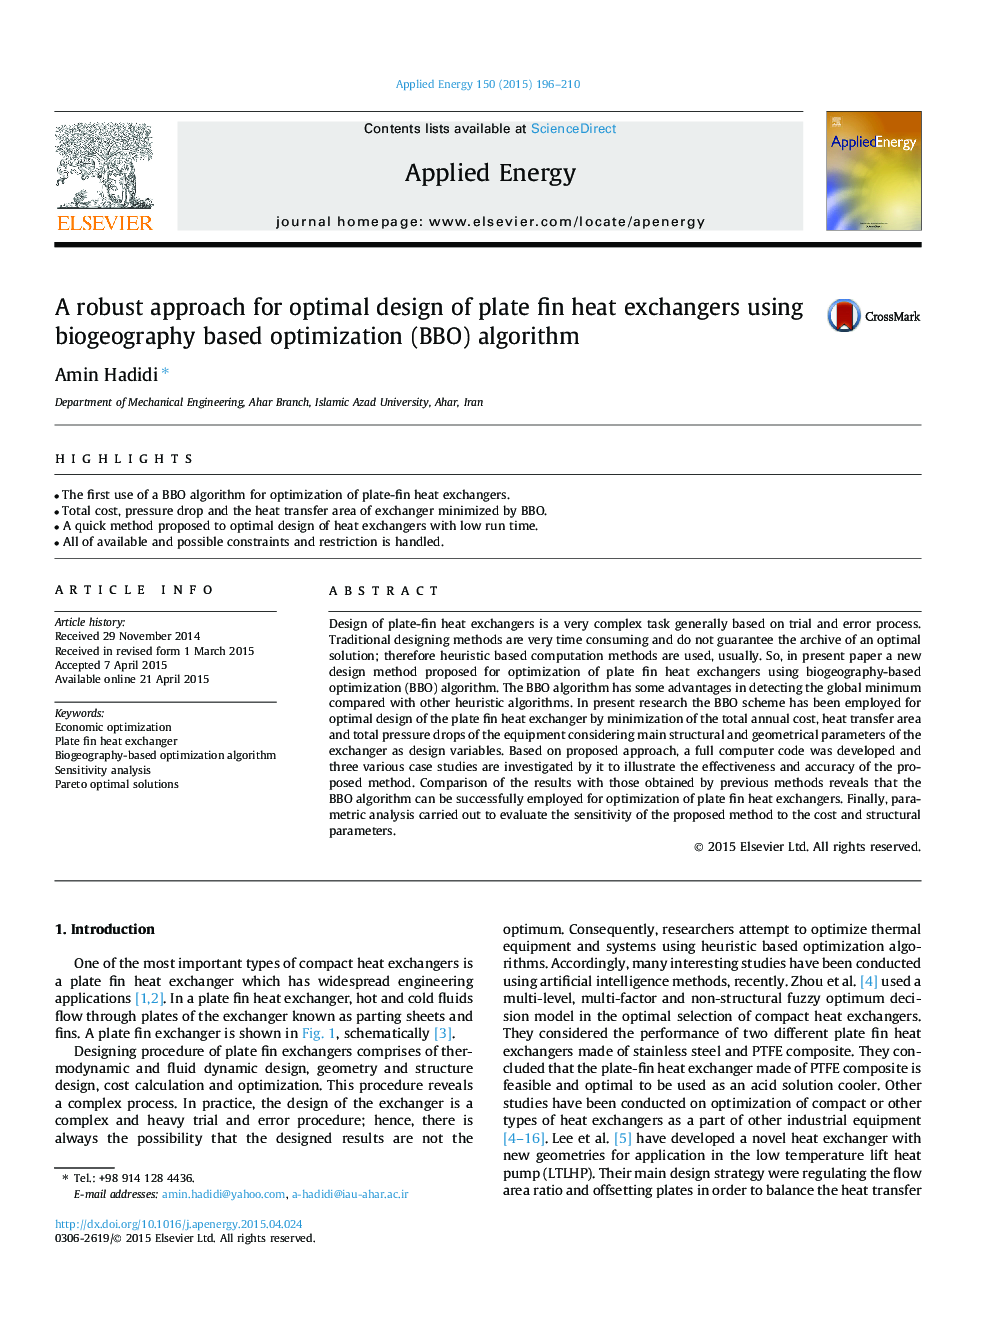 A robust approach for optimal design of plate fin heat exchangers using biogeography based optimization (BBO) algorithm